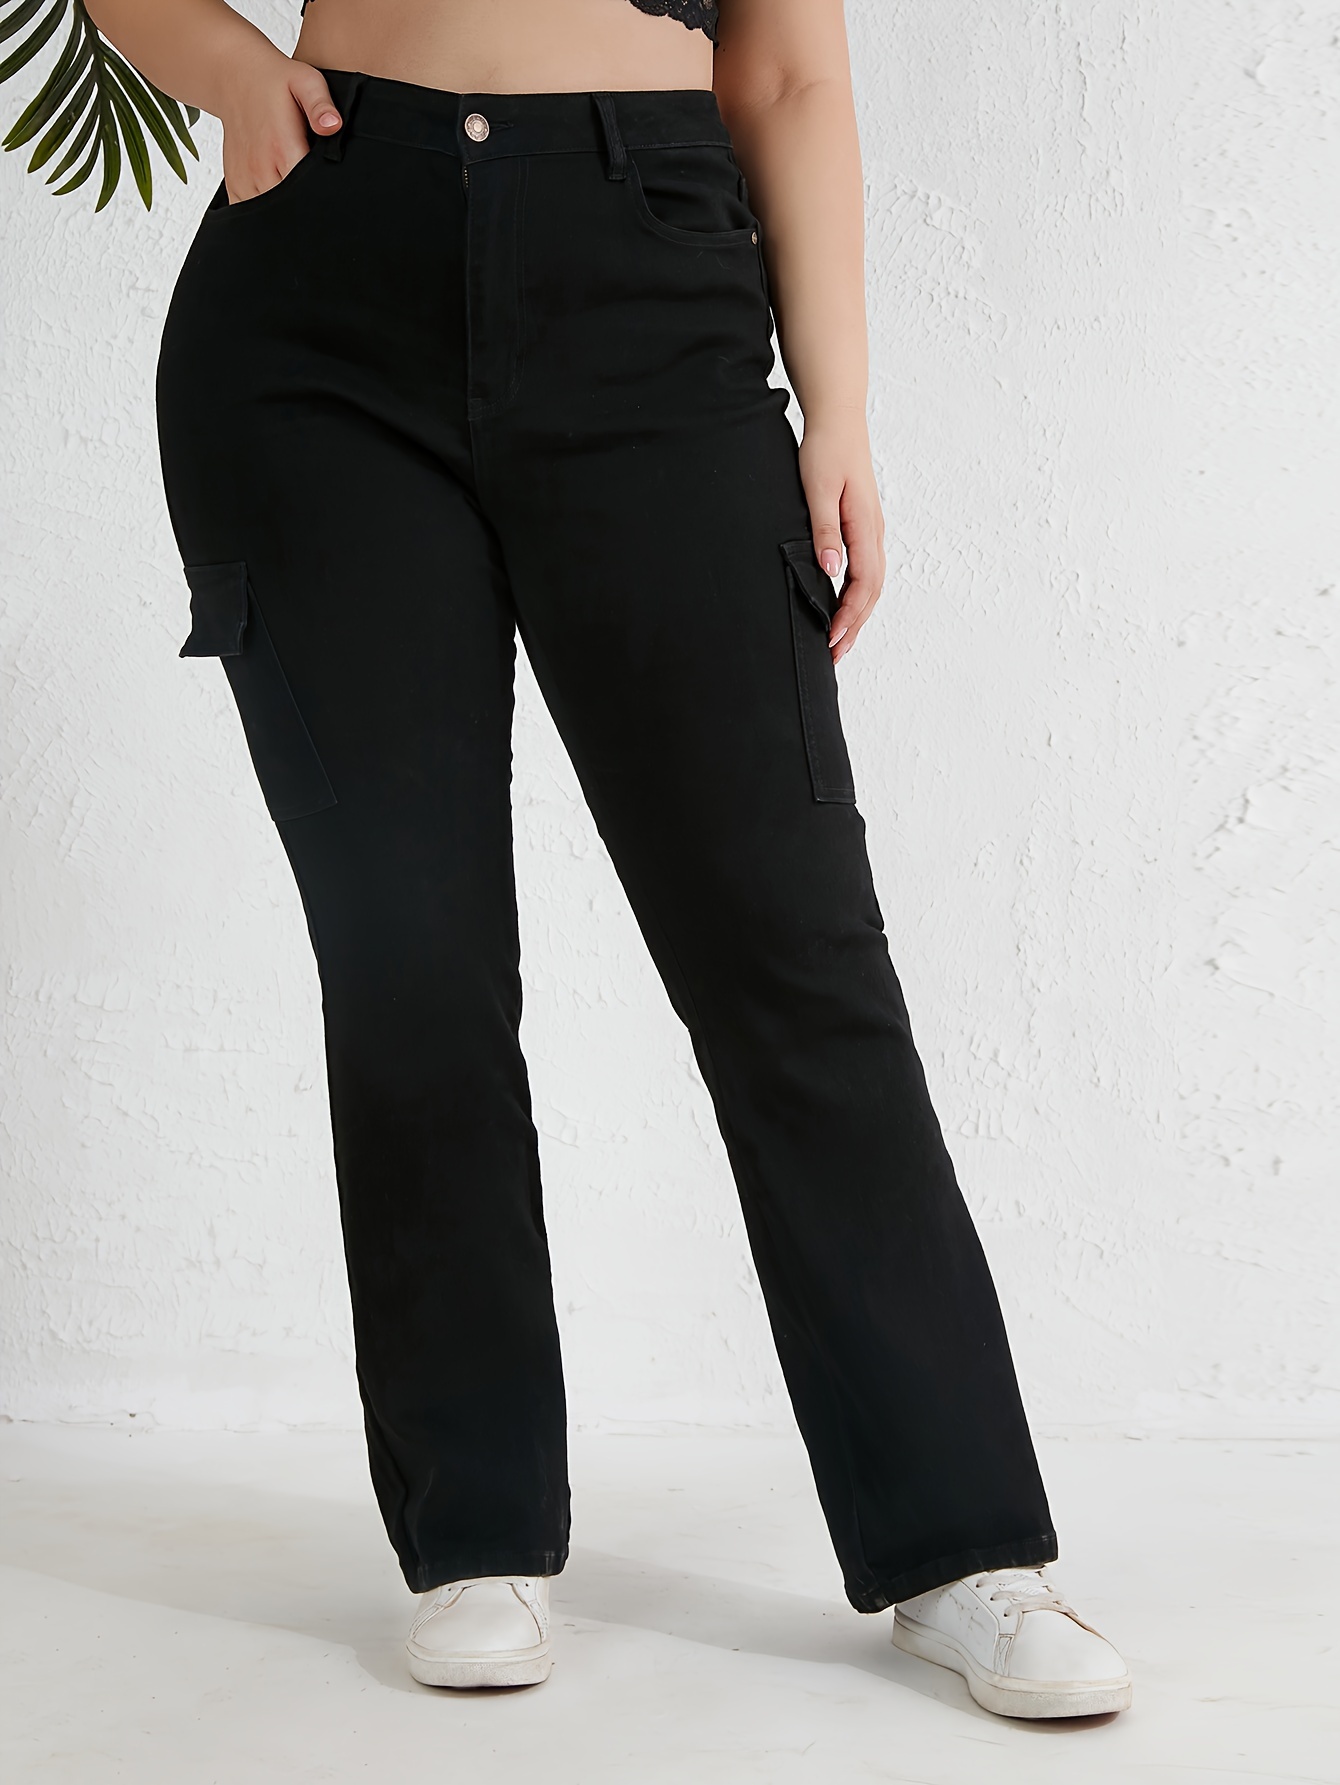 Women's High Waisted Side Flap Pocket Cargo Flare Casual Leggings